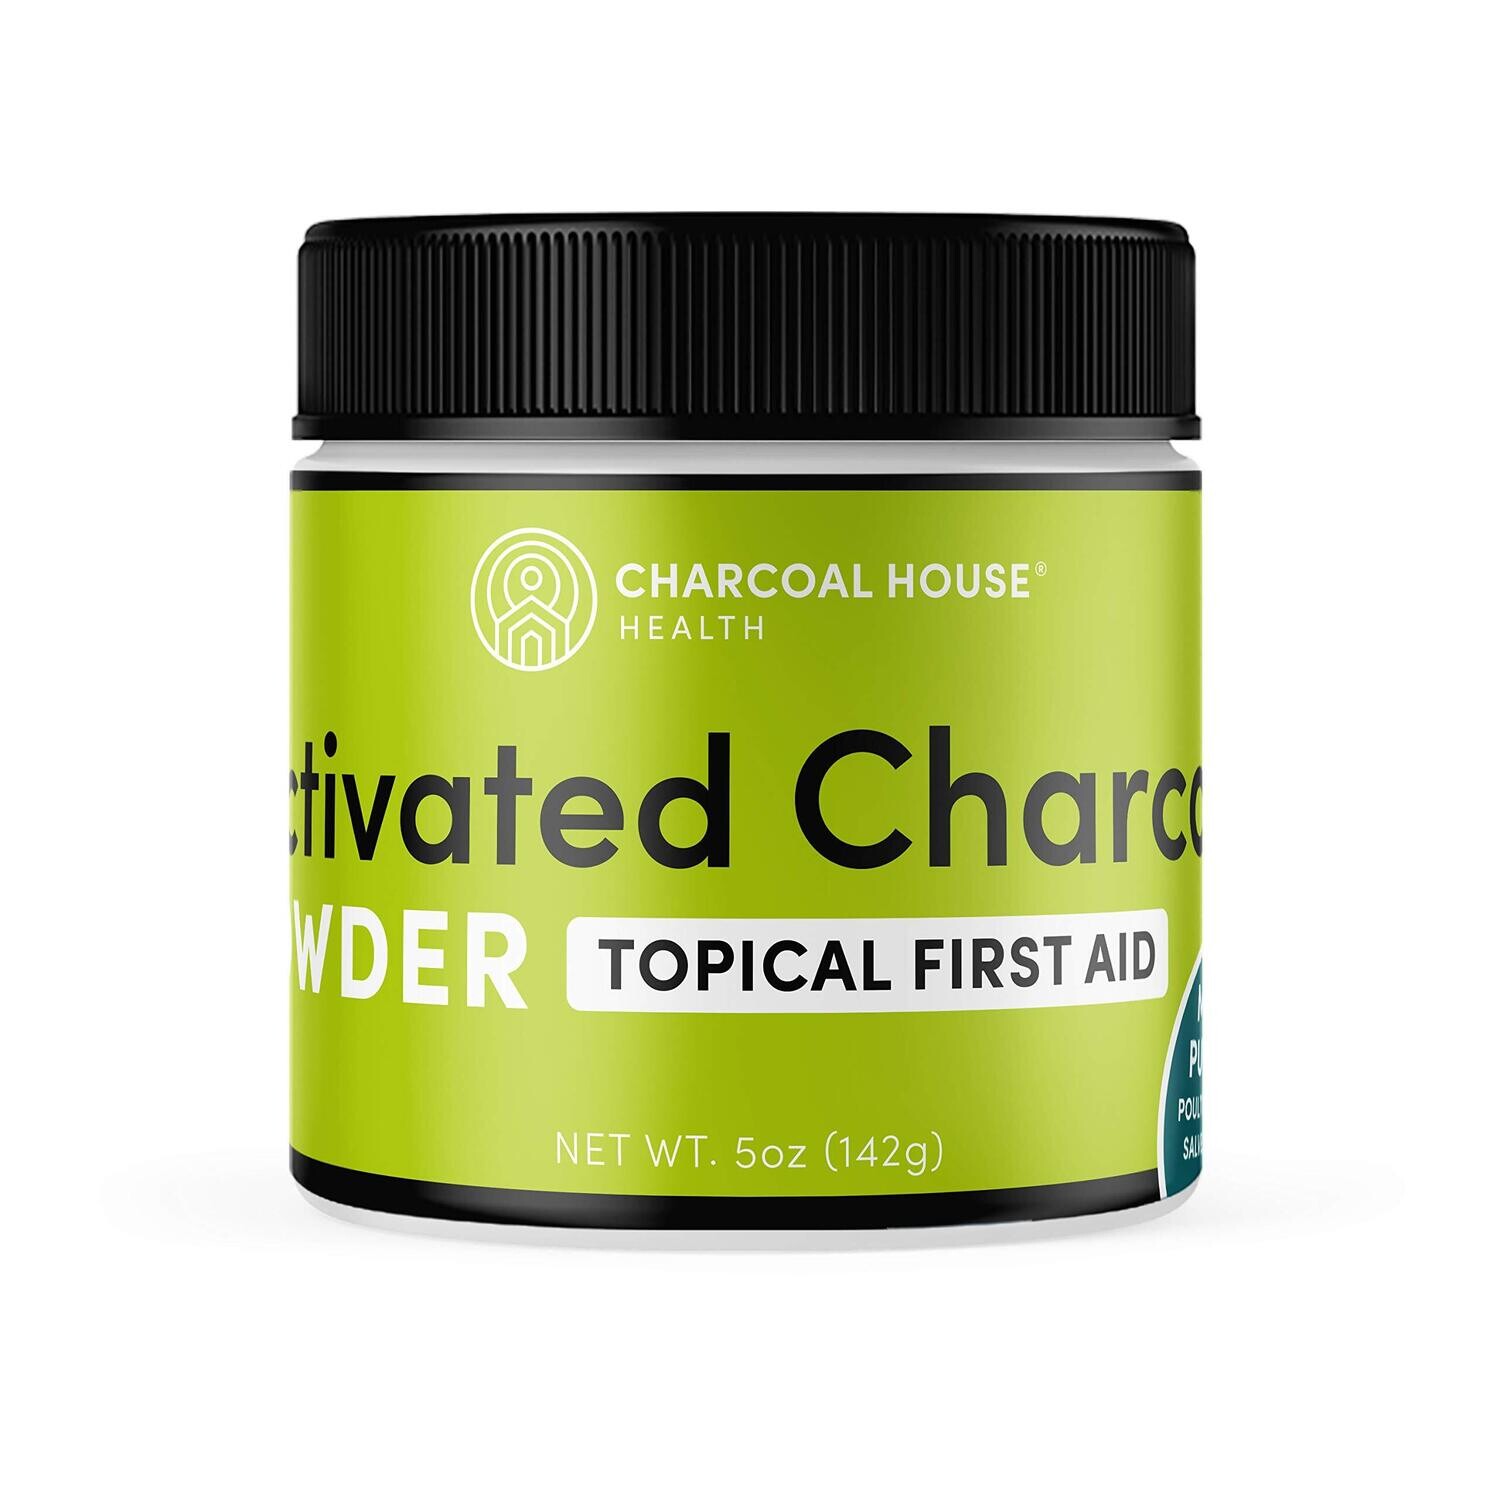 Charcoal House Activated Charcoal Powder - Topical First Aid 5oz (I6)